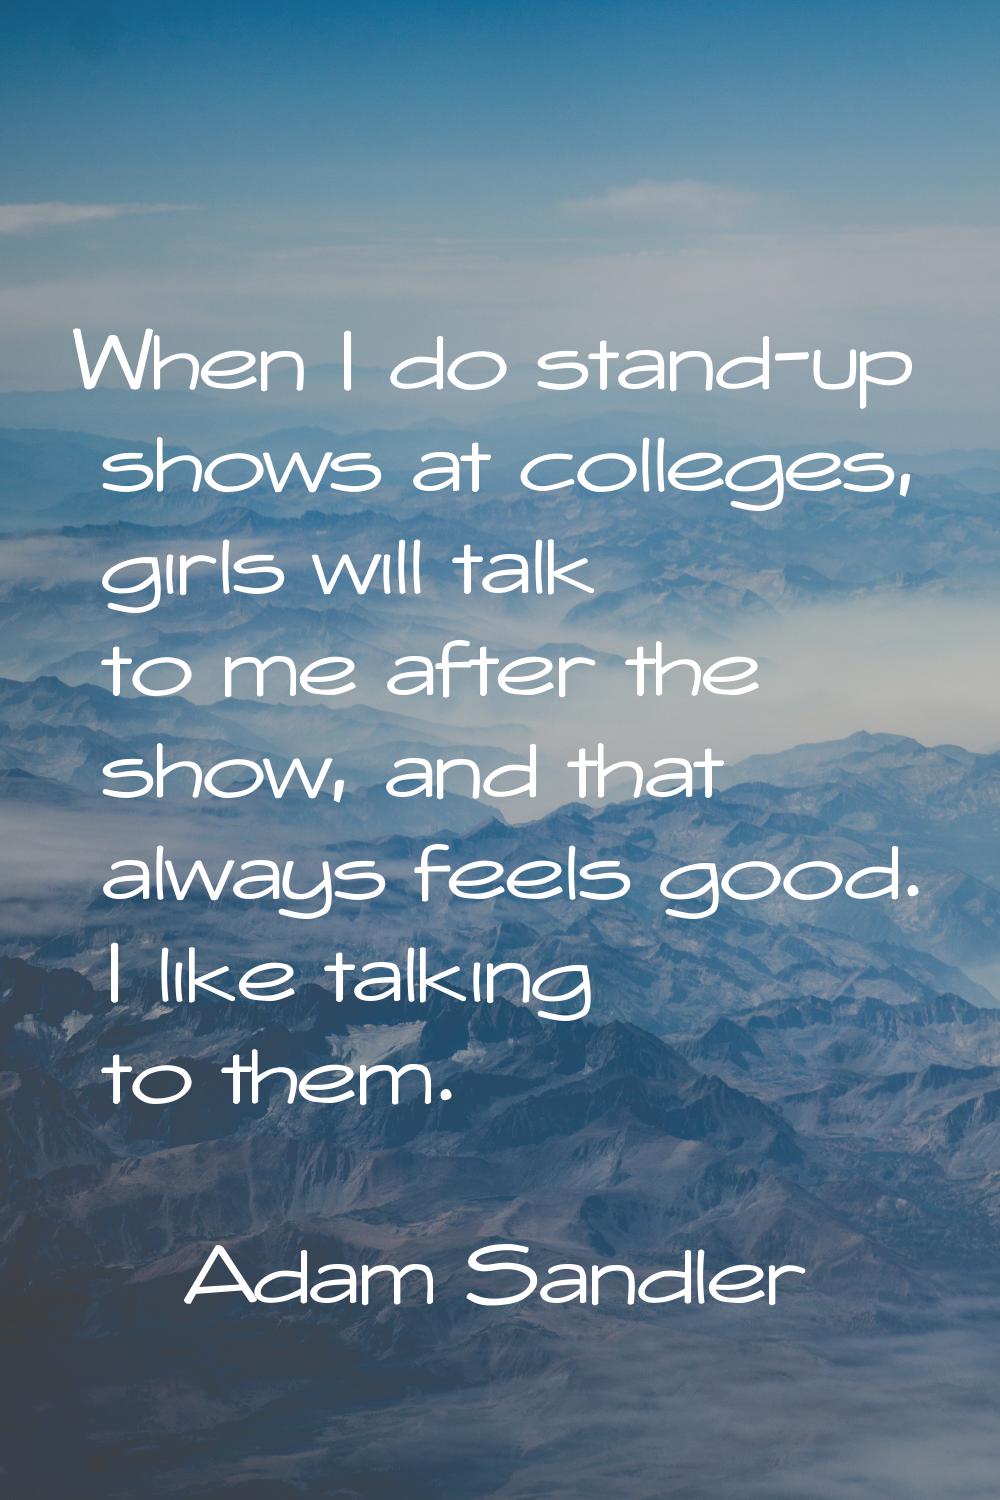 When I do stand-up shows at colleges, girls will talk to me after the show, and that always feels g